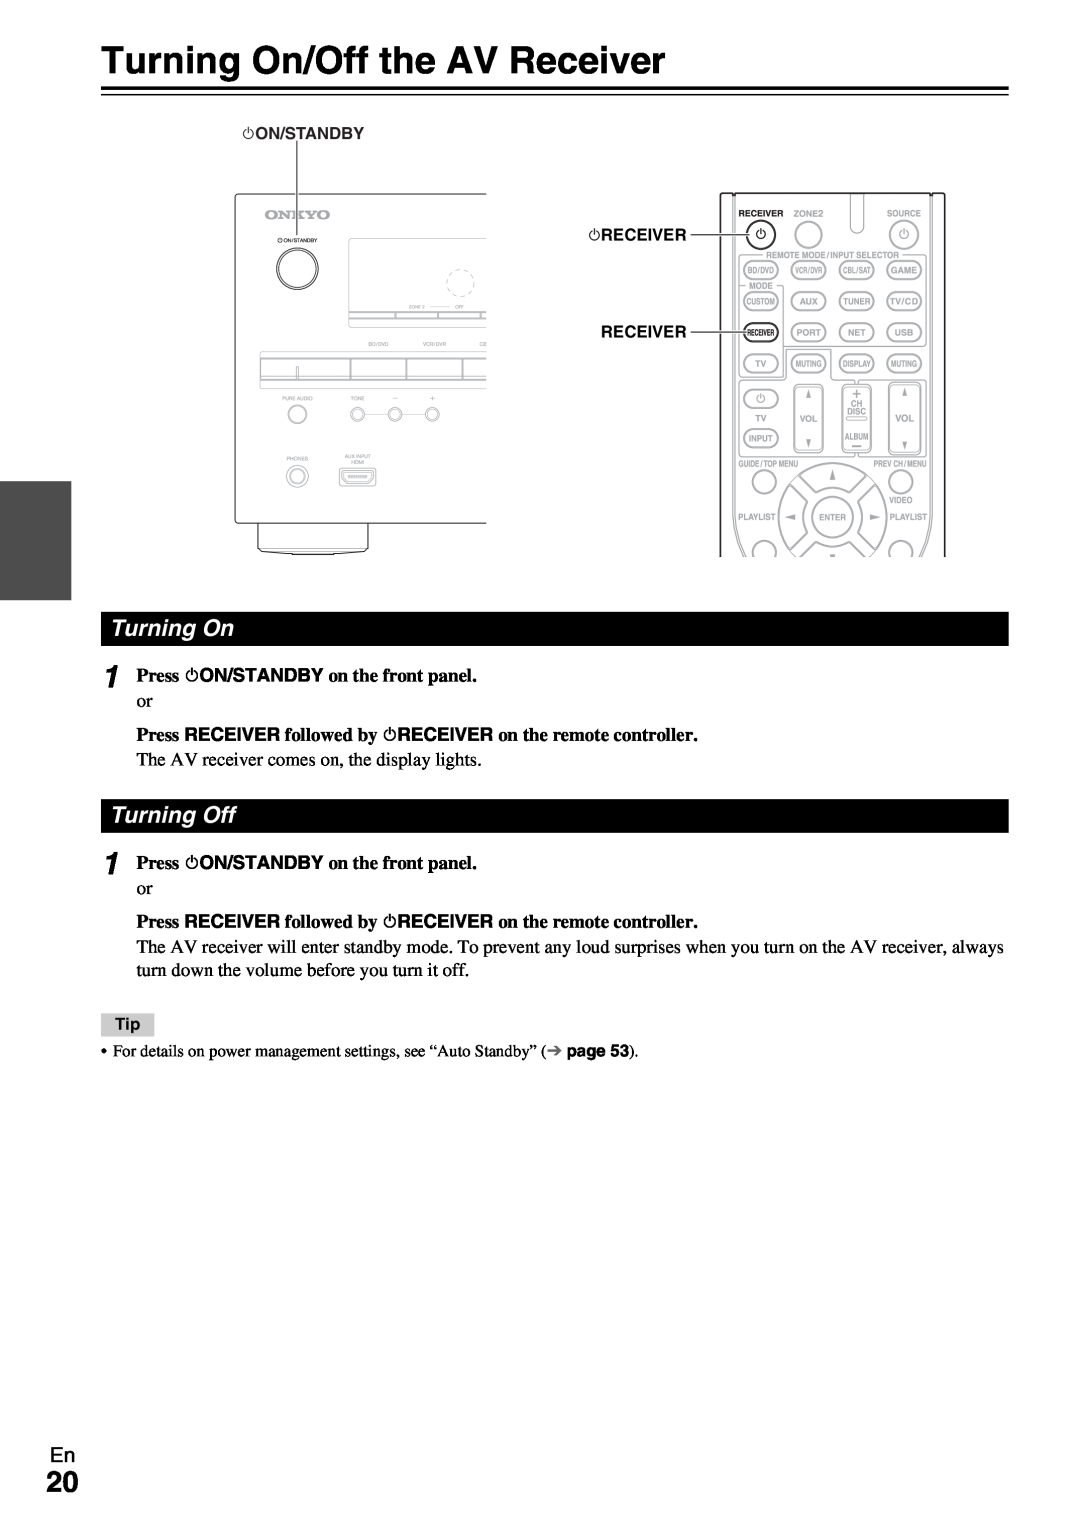 Onkyo HT-RC360 instruction manual Turning On/Off the AV Receiver, Turning Off 